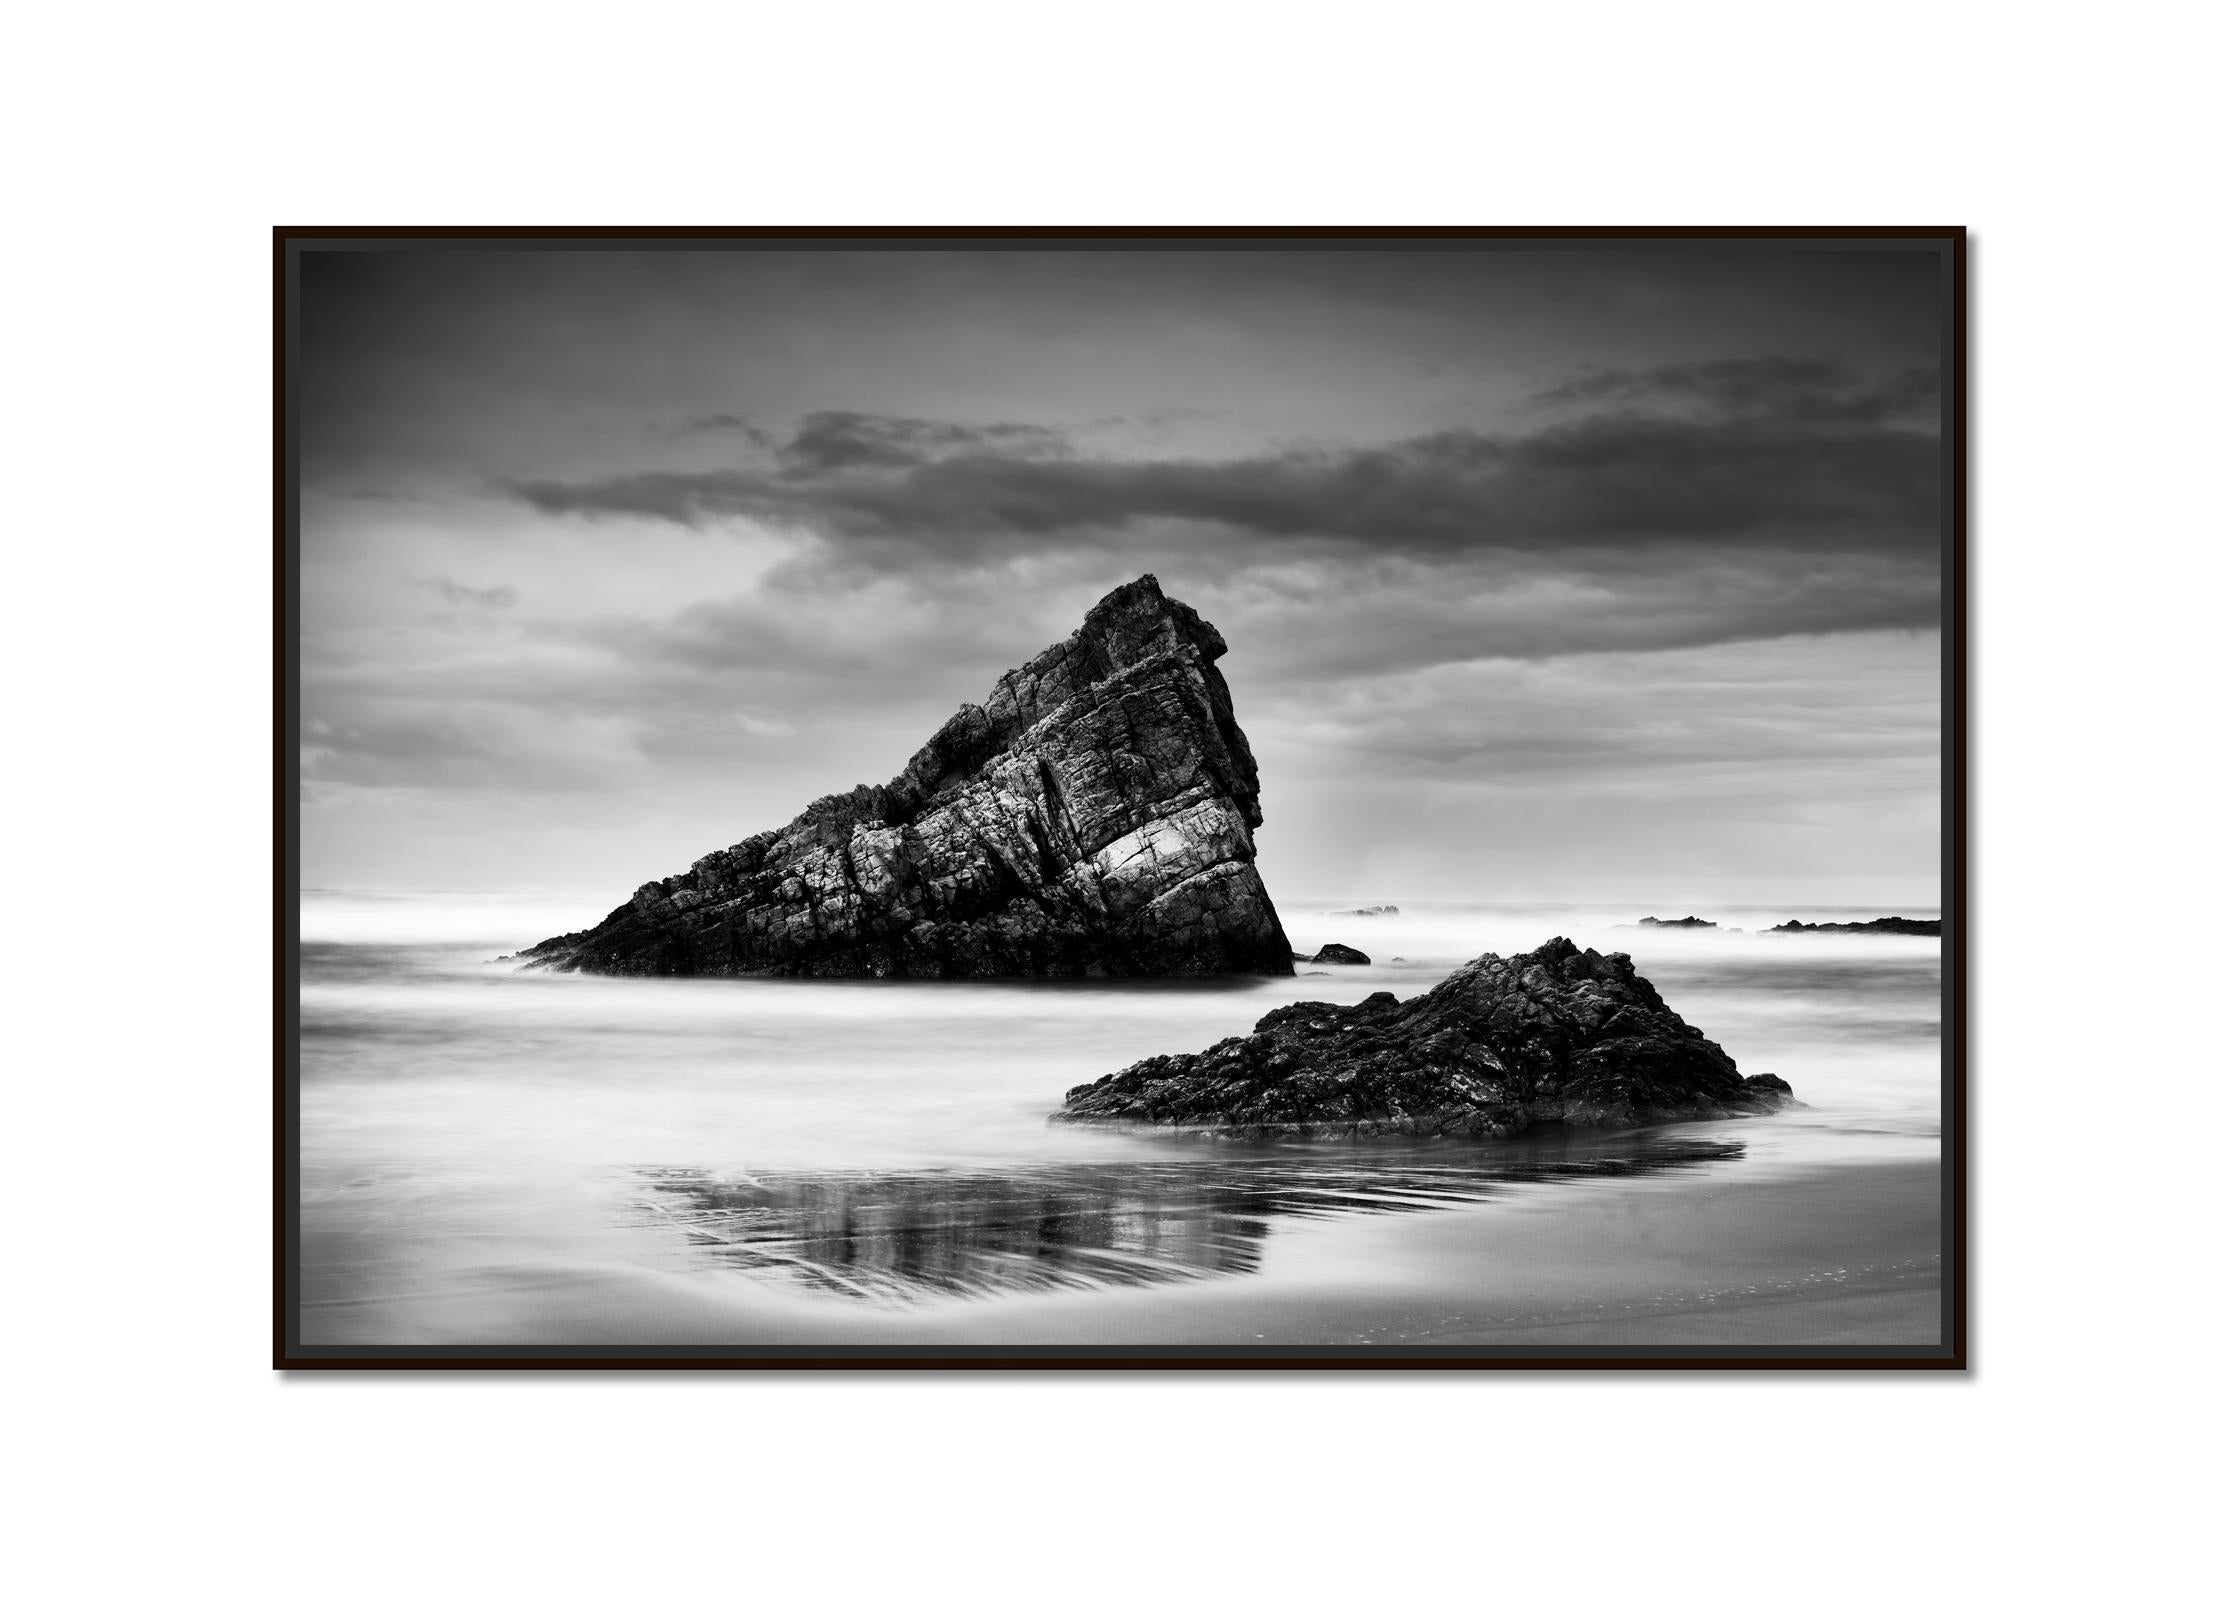 Bay of Biscay, shoreline, beach, Spain, black and white landscape photography - Photograph by Gerald Berghammer